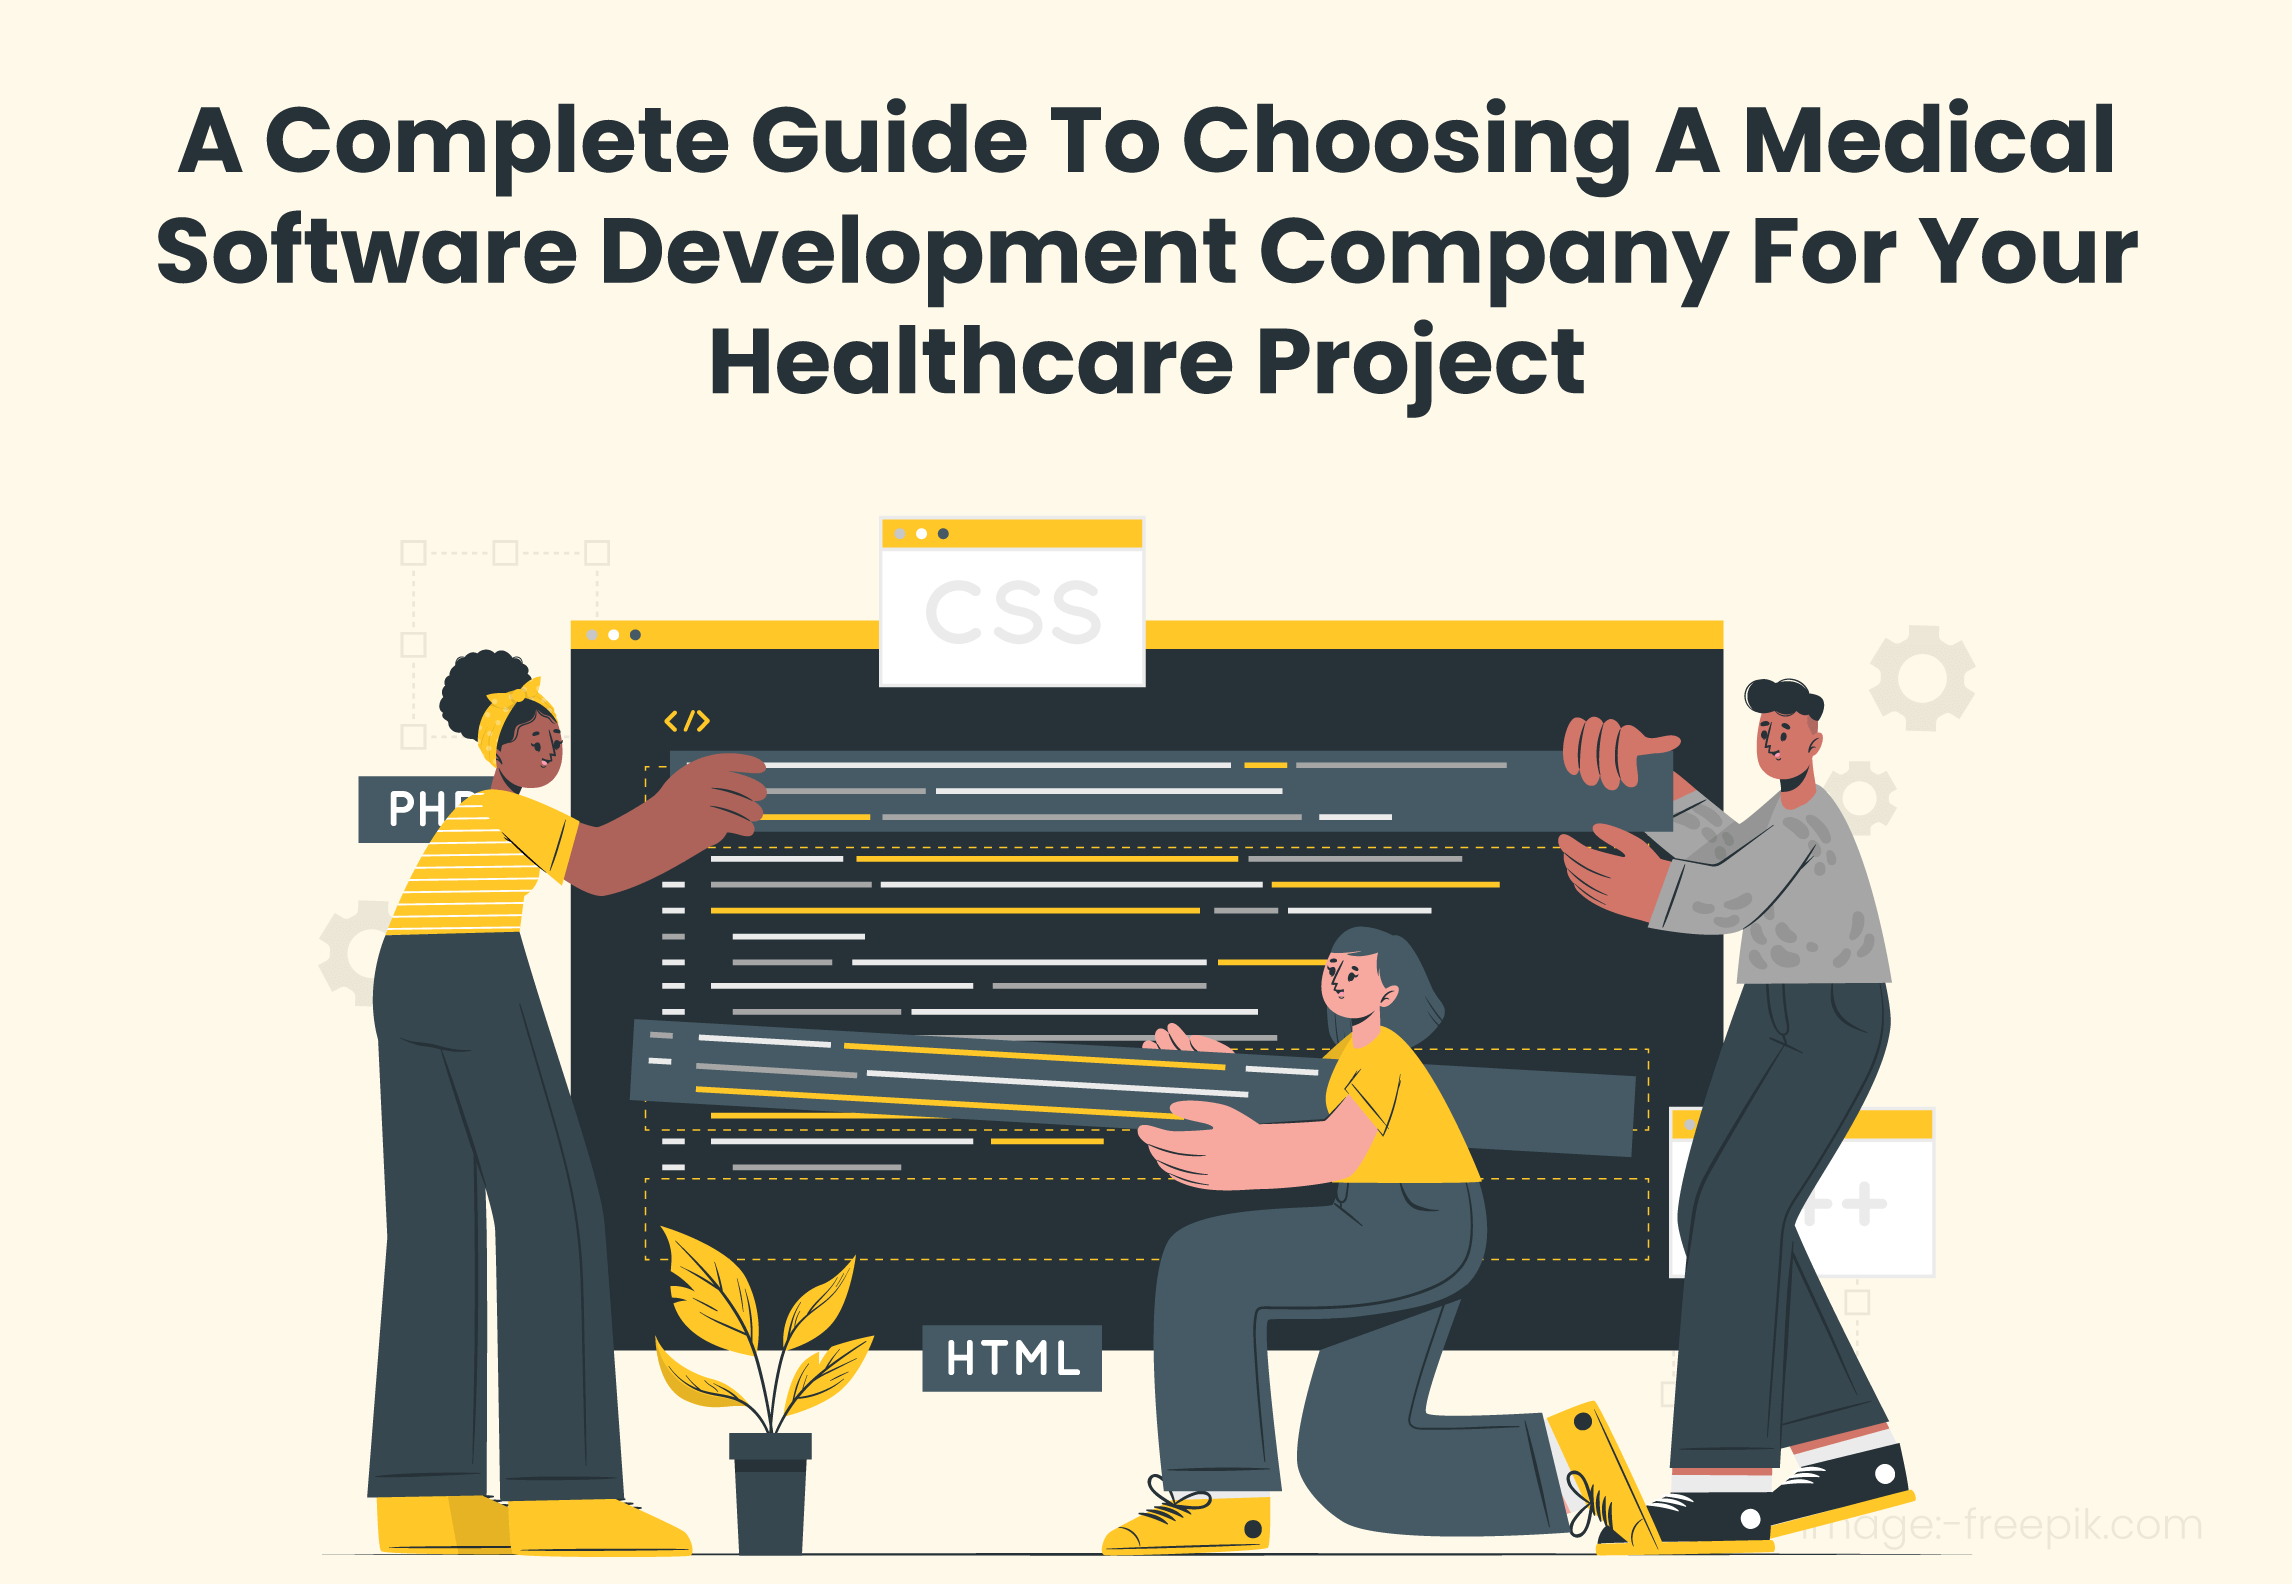 Finding The Right Medical Software Development Company | Complete Guide